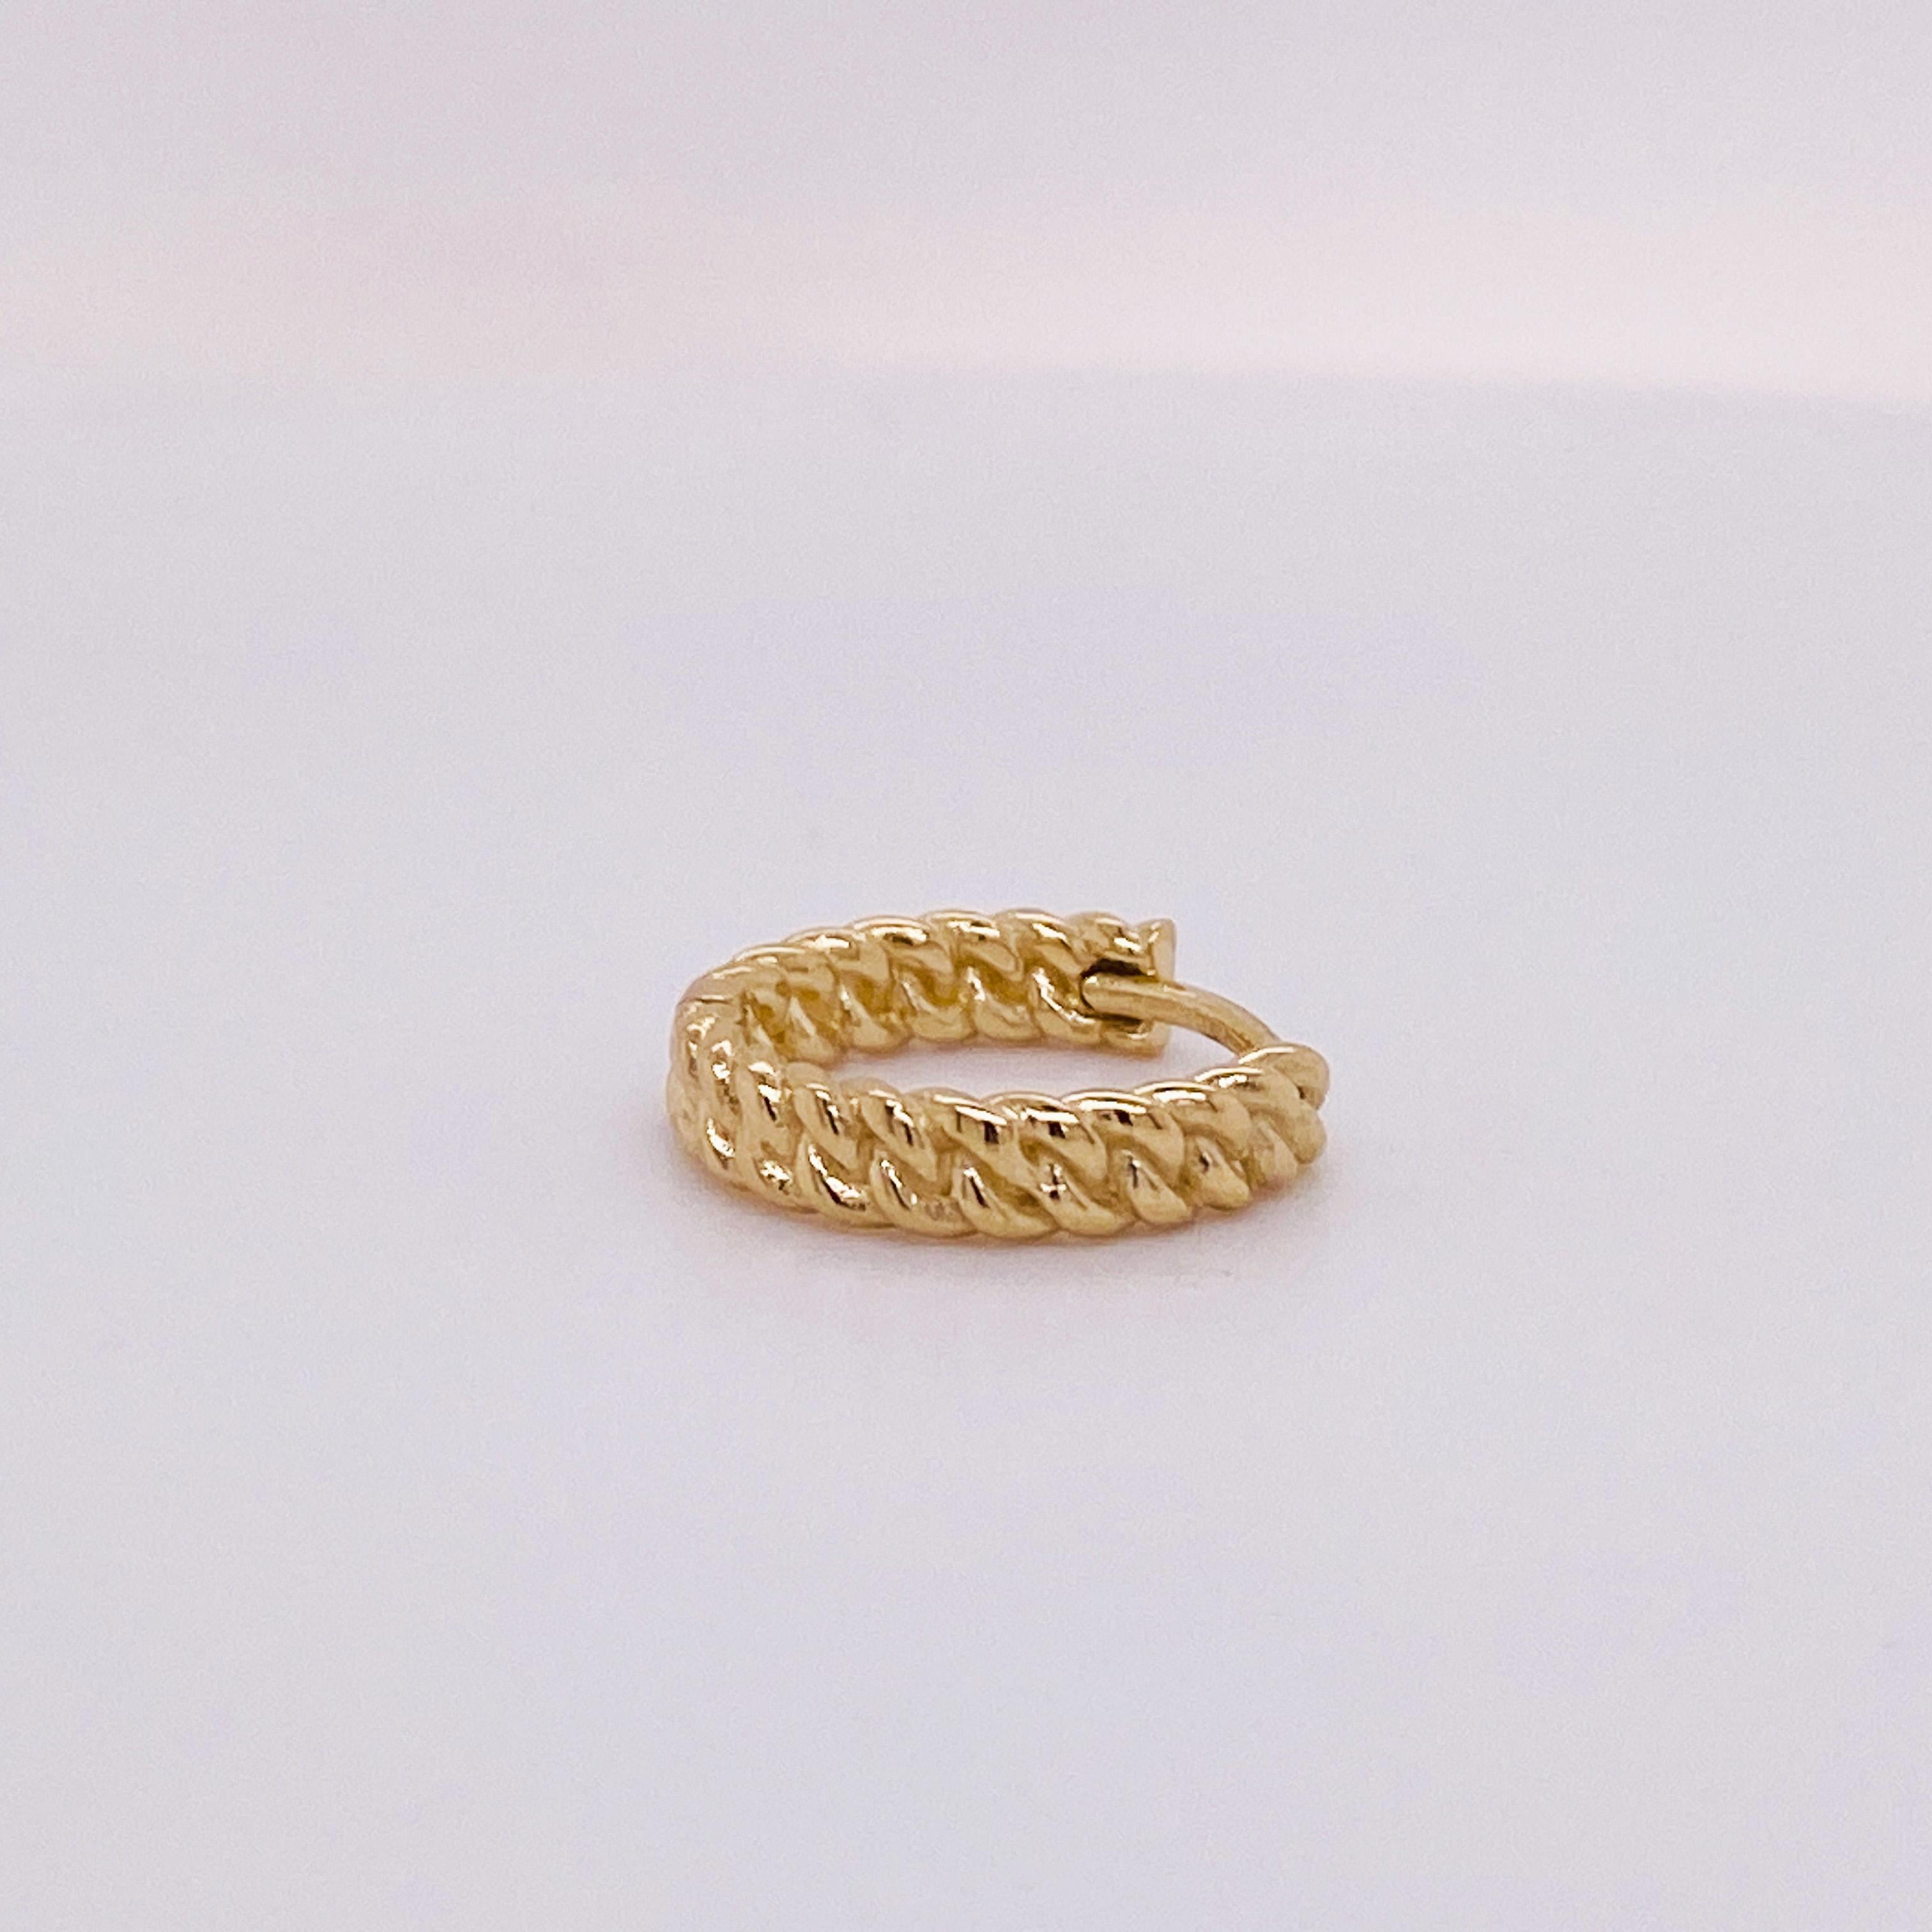 Petite Braided Huggie Hoops, 13 Mm in 14Karat Yellow Gold, Invisible Hinge LV In New Condition For Sale In Austin, TX